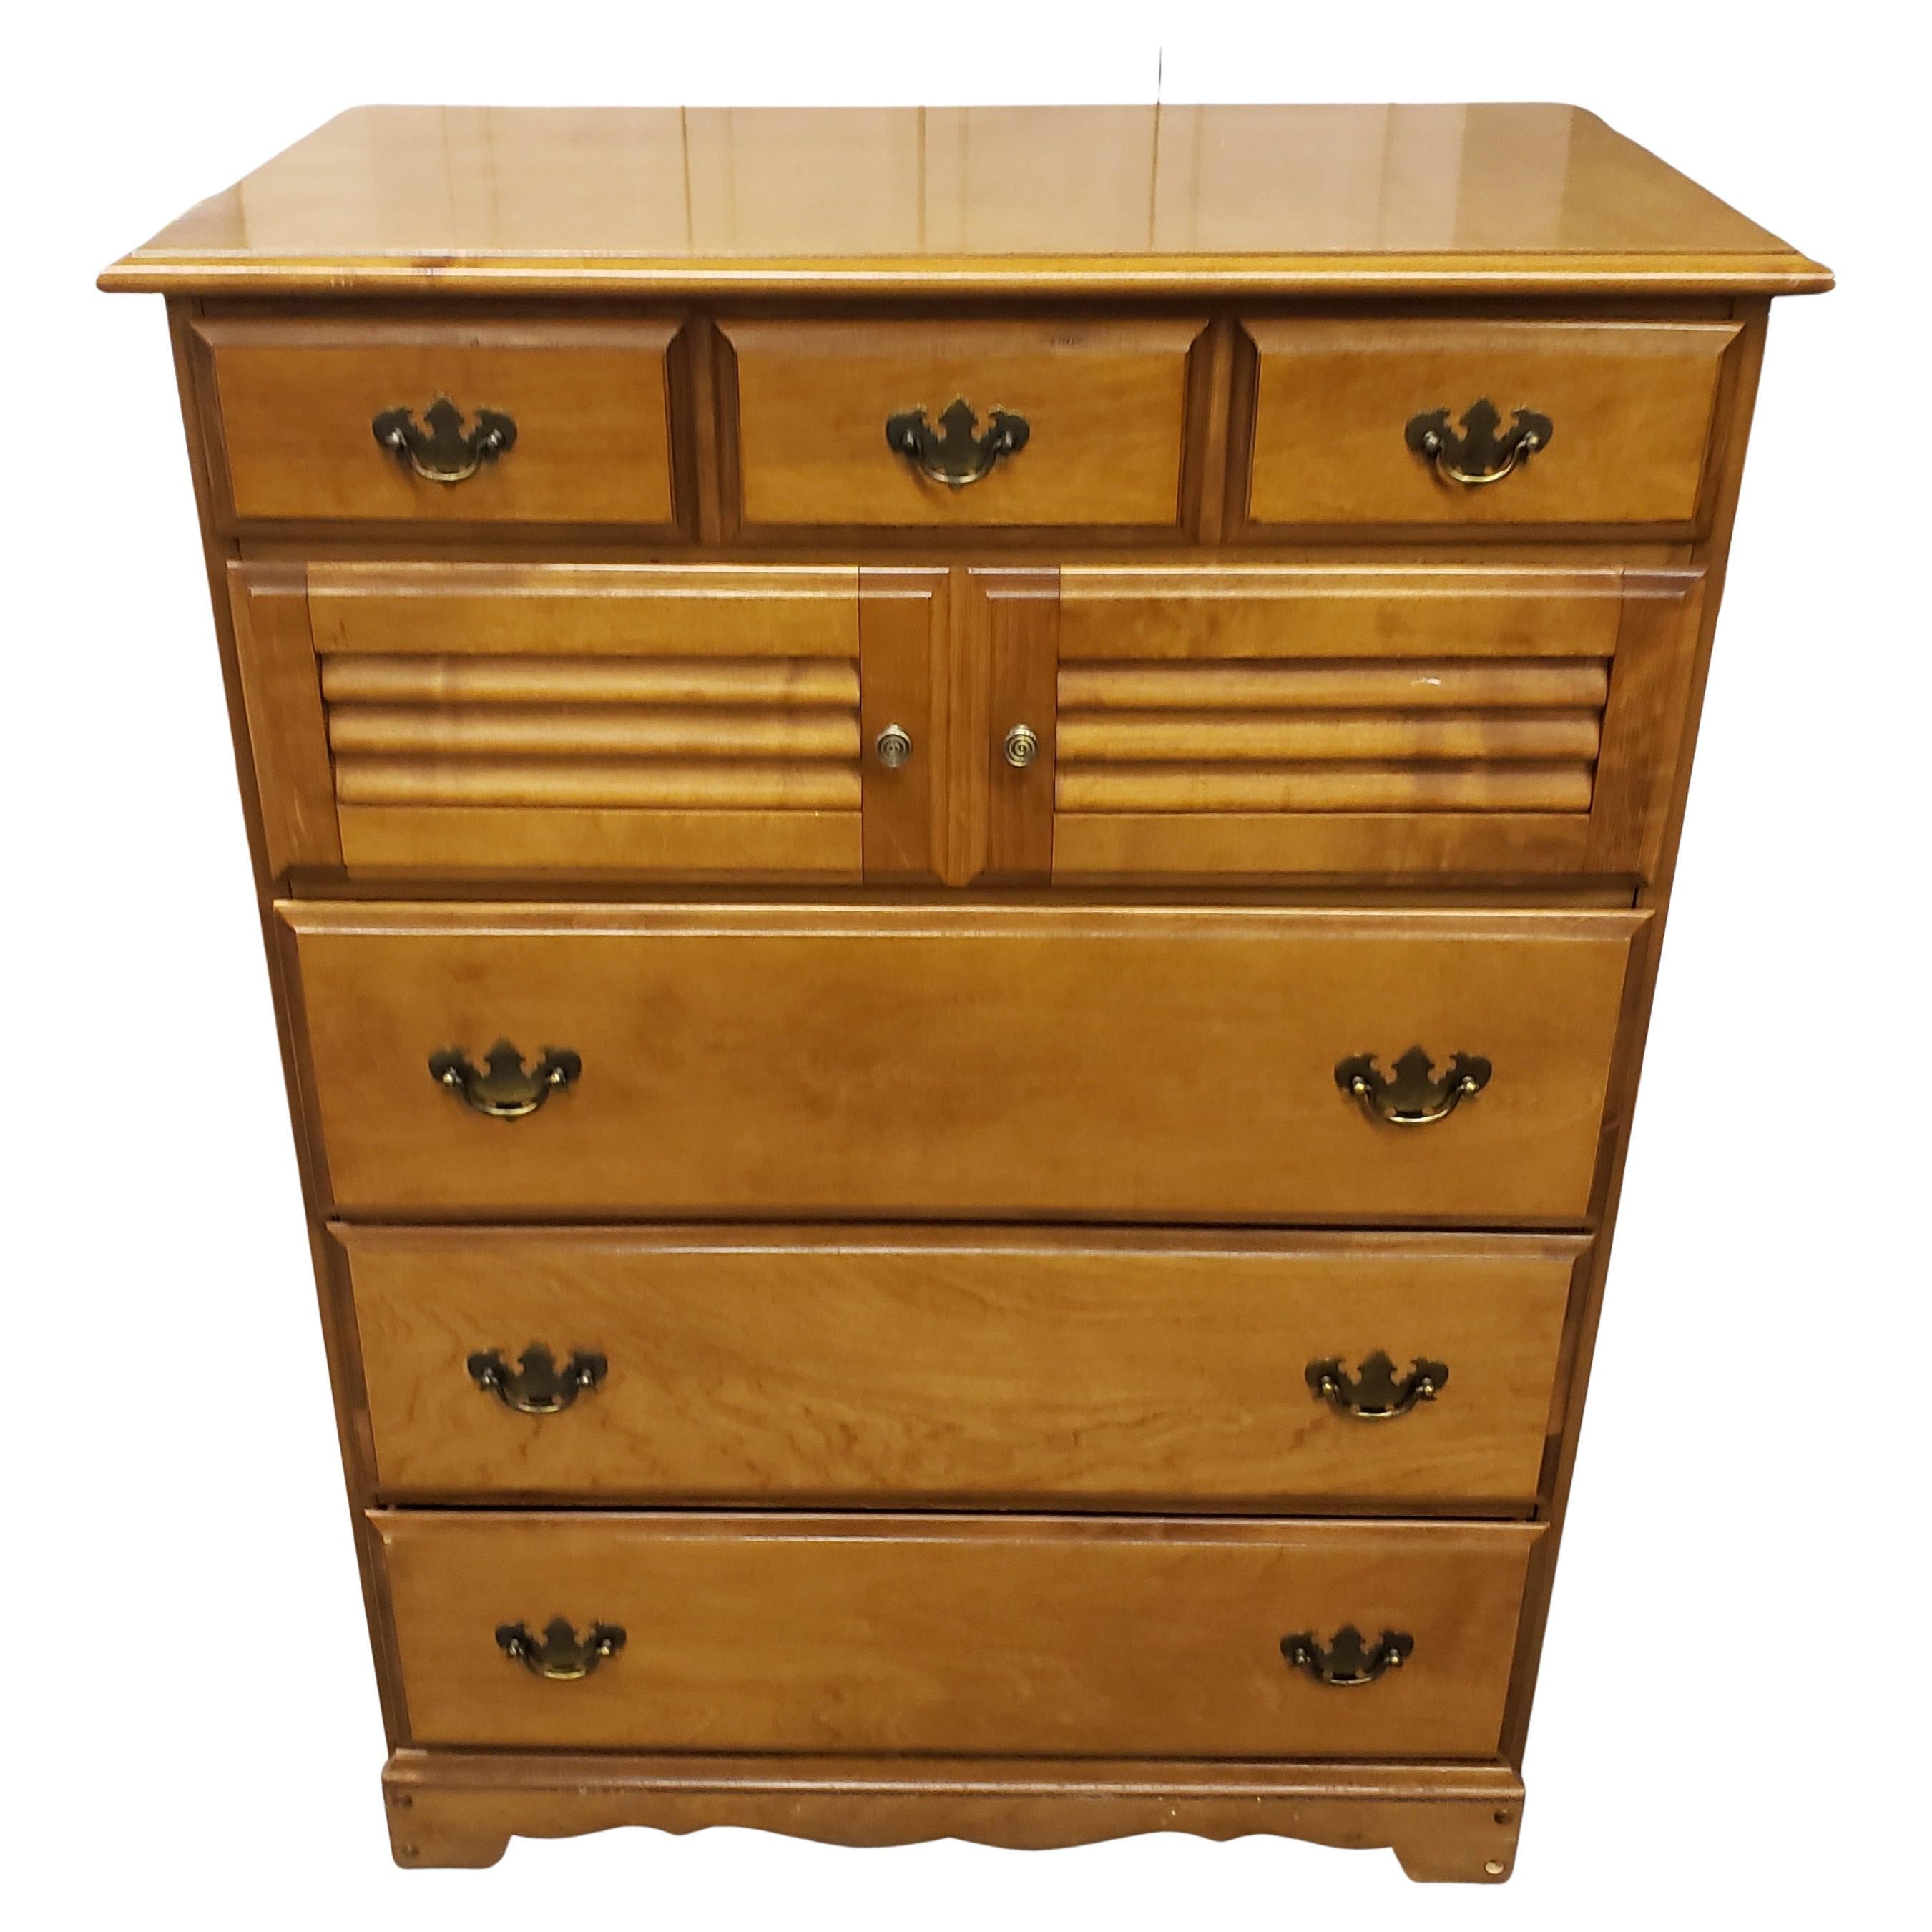 For your consideration is a B. P. John Maple Chest of Drawers from the 1960s in good vintage condition. All dovetail drawers open and close smoothly.  Measures 34 inches in width and stand 46.25 inches tall. We have a matching dresser with mirror in